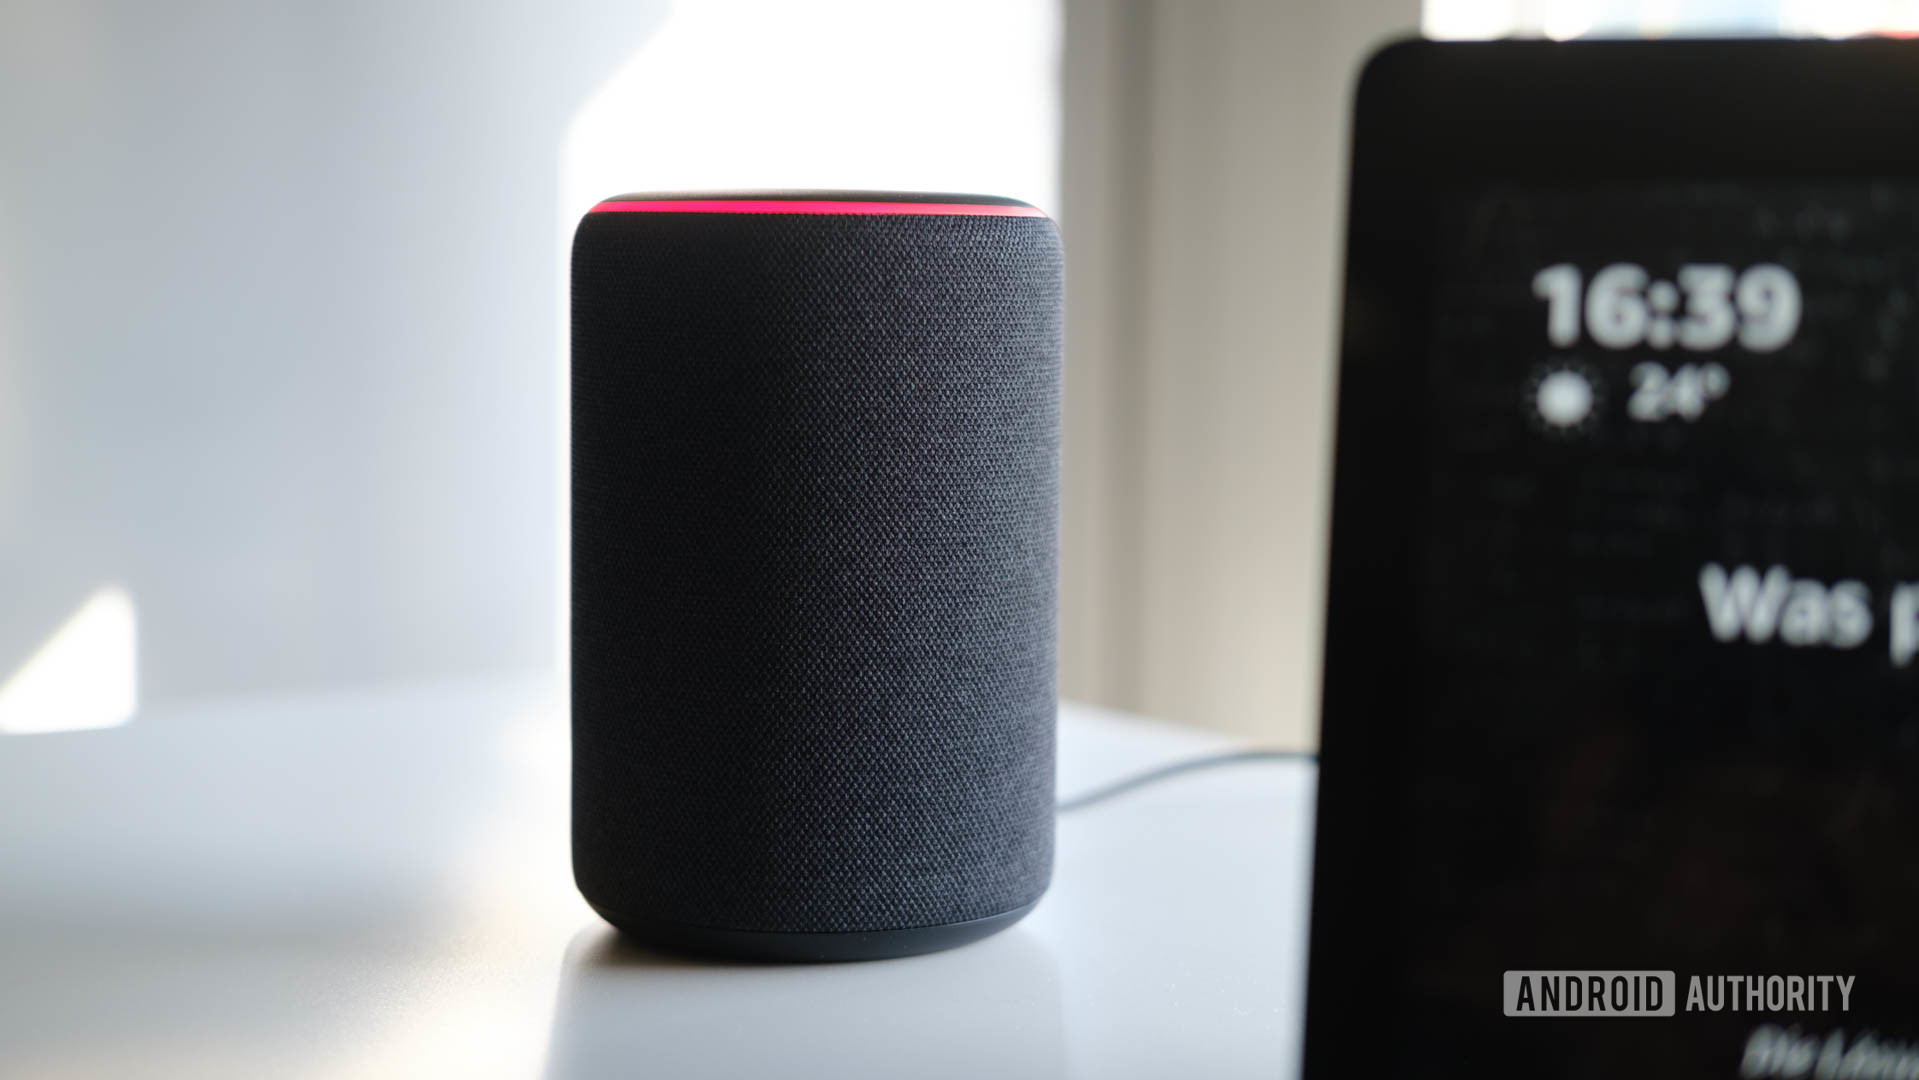 Amazon's 2019 Echo red-ringing on a table